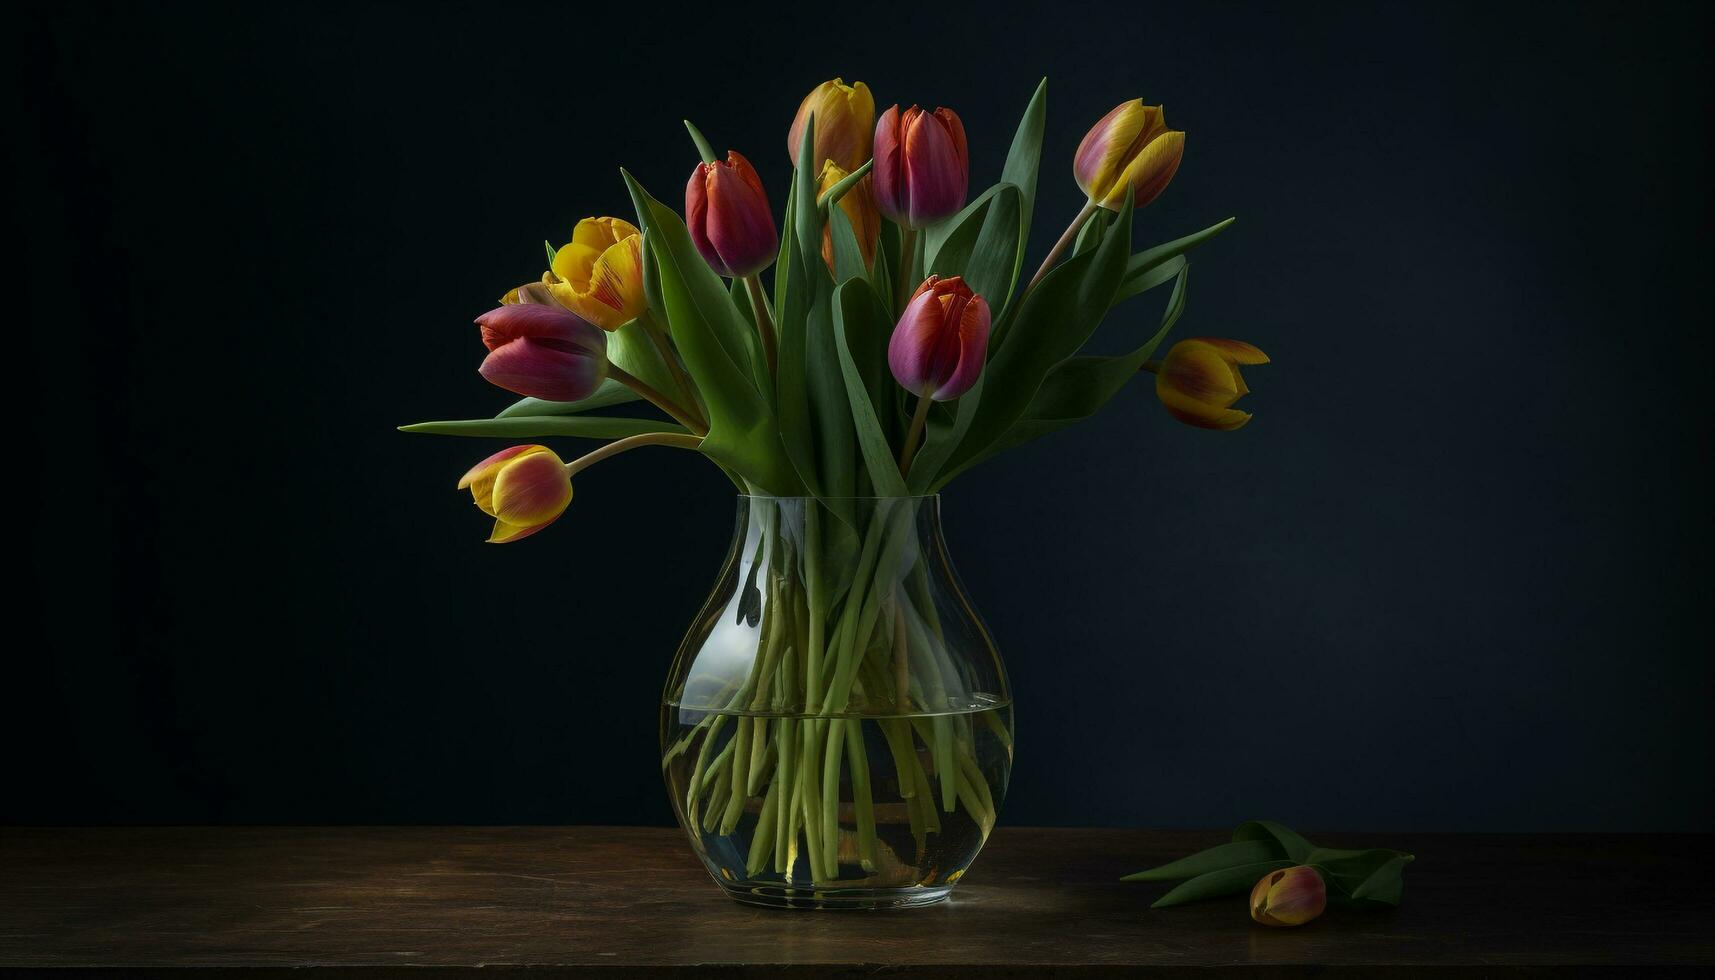 Freshness of nature beauty in a bouquet of vibrant tulips generated by AI photo